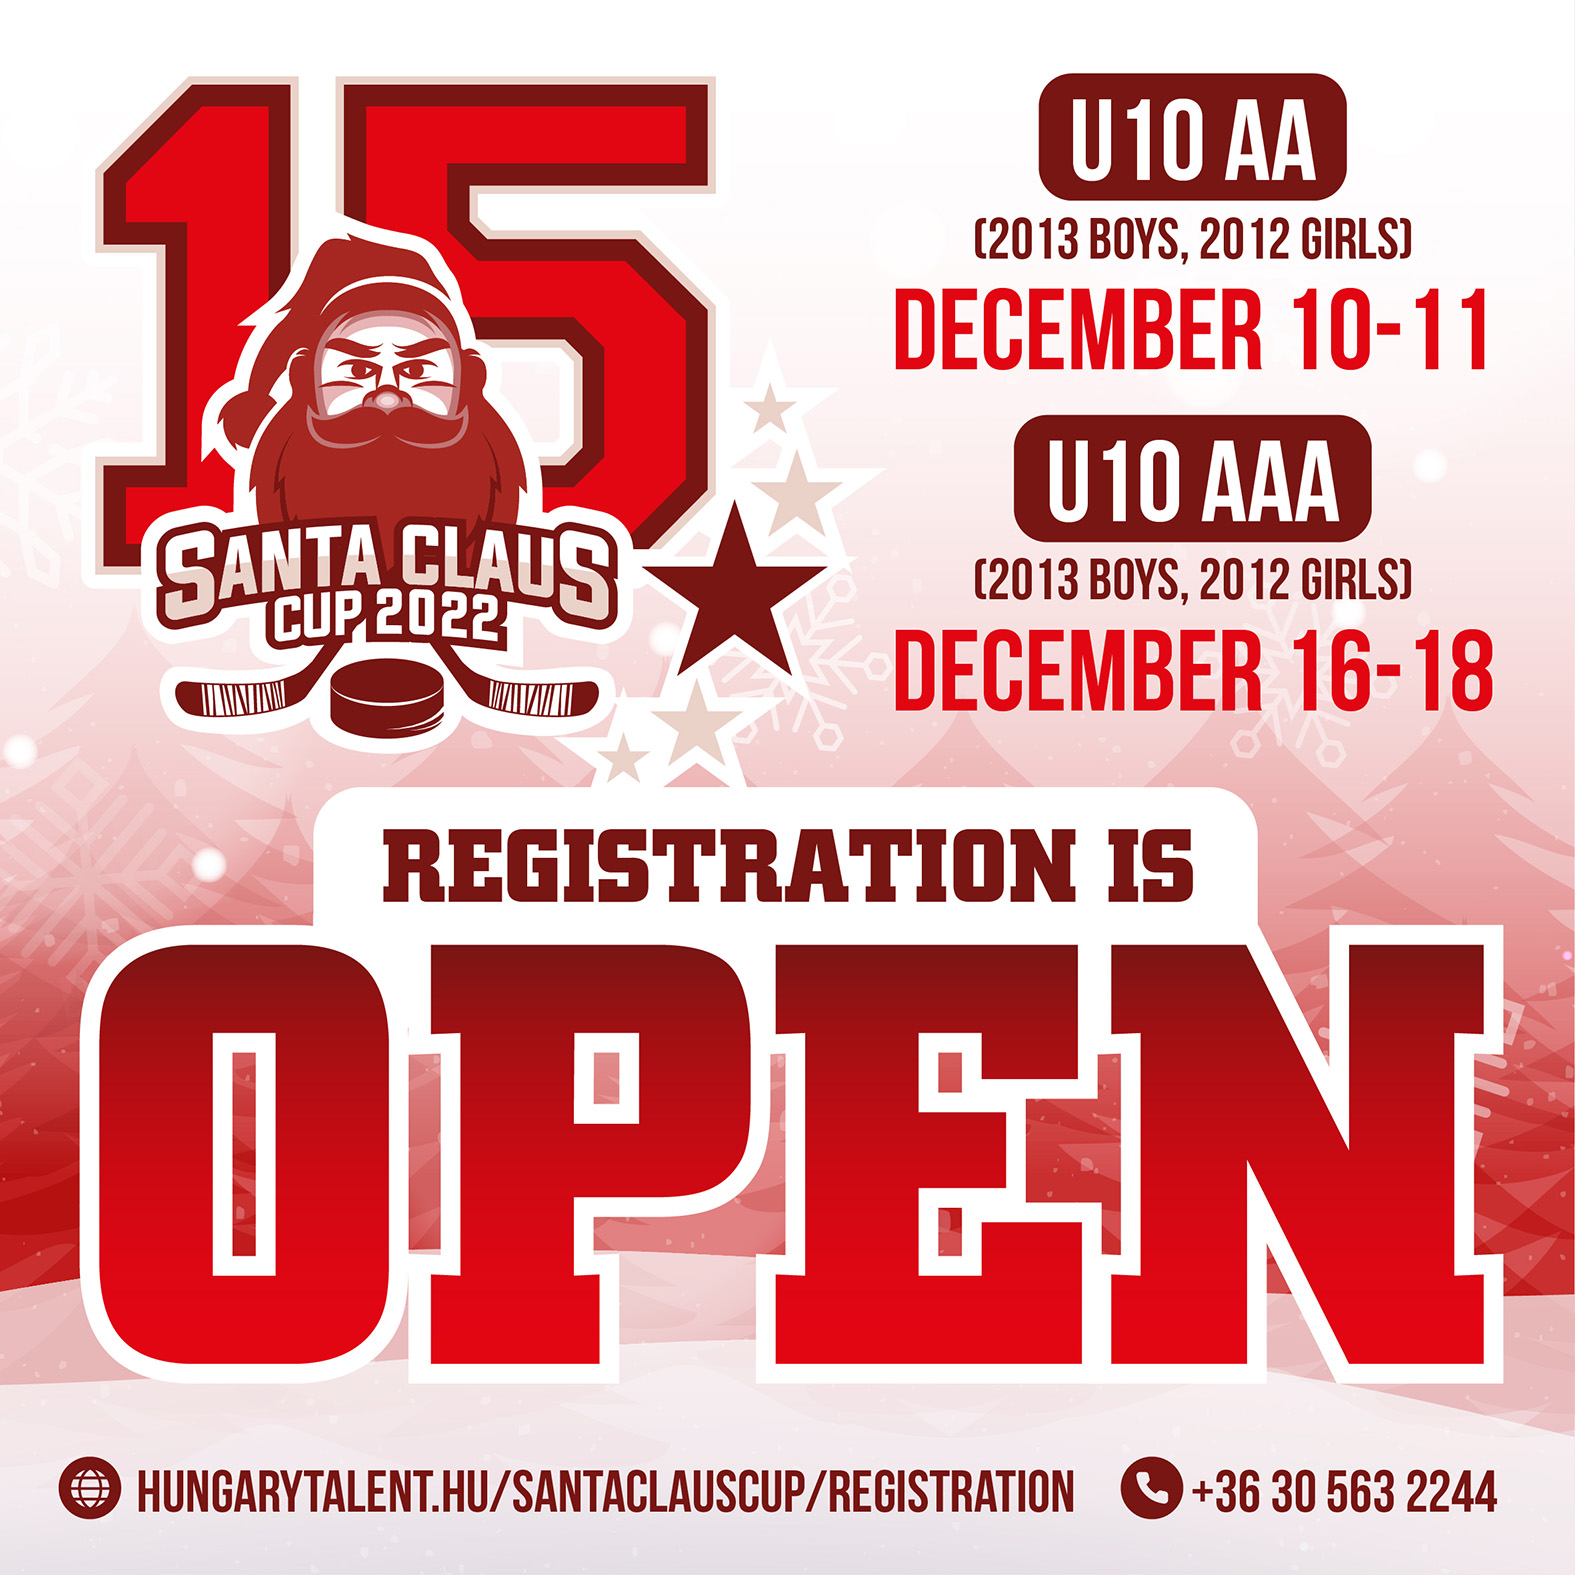 Registration is now open for the 15th Santa Claus Cup!